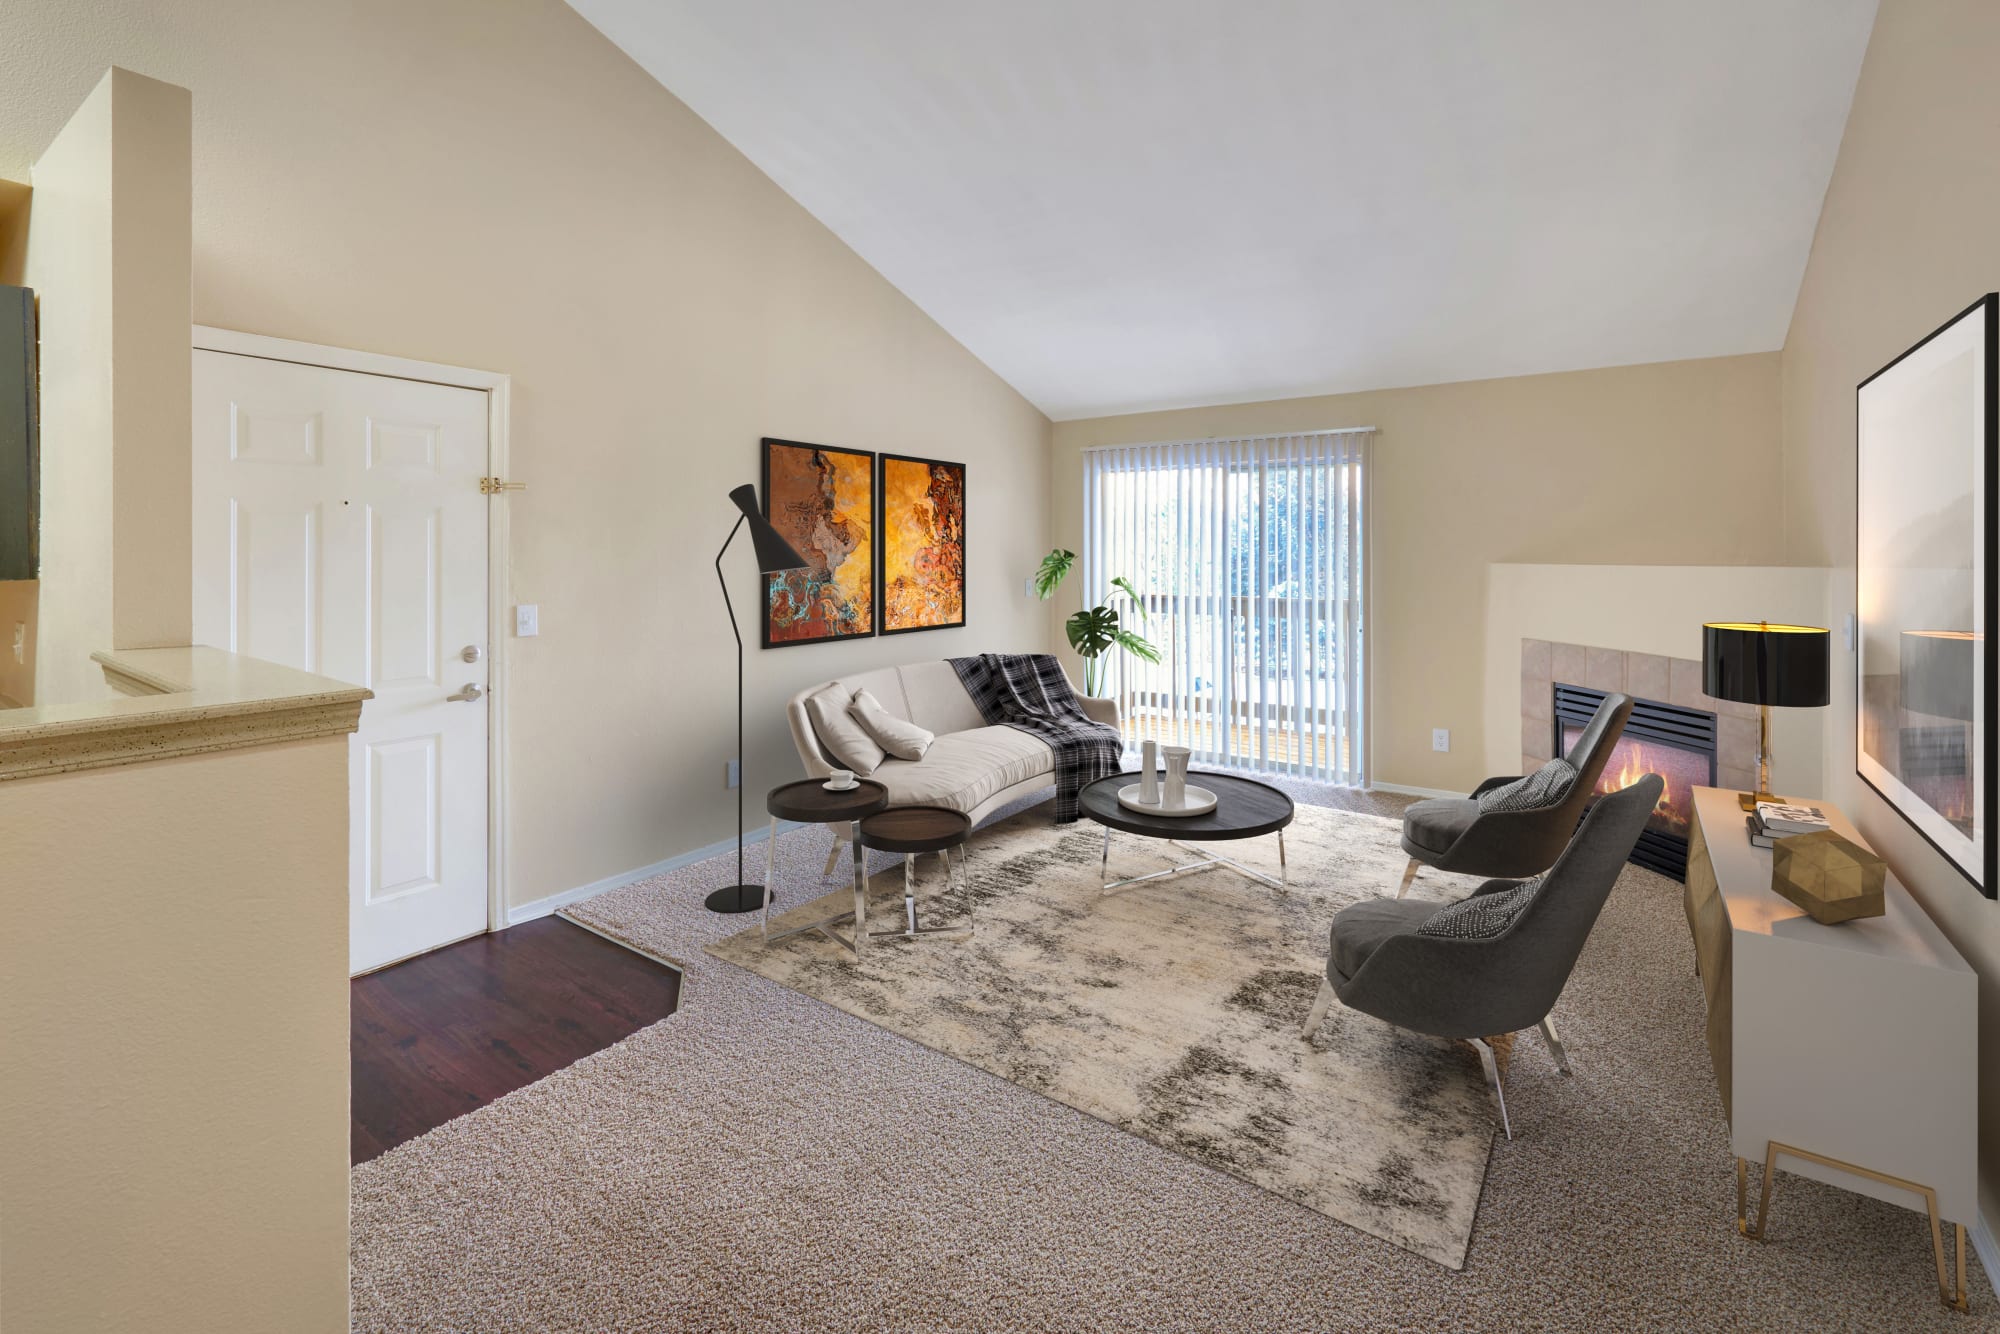 Living room with a fireplace at Crossroads at City Center Apartments in Aurora, Colorado